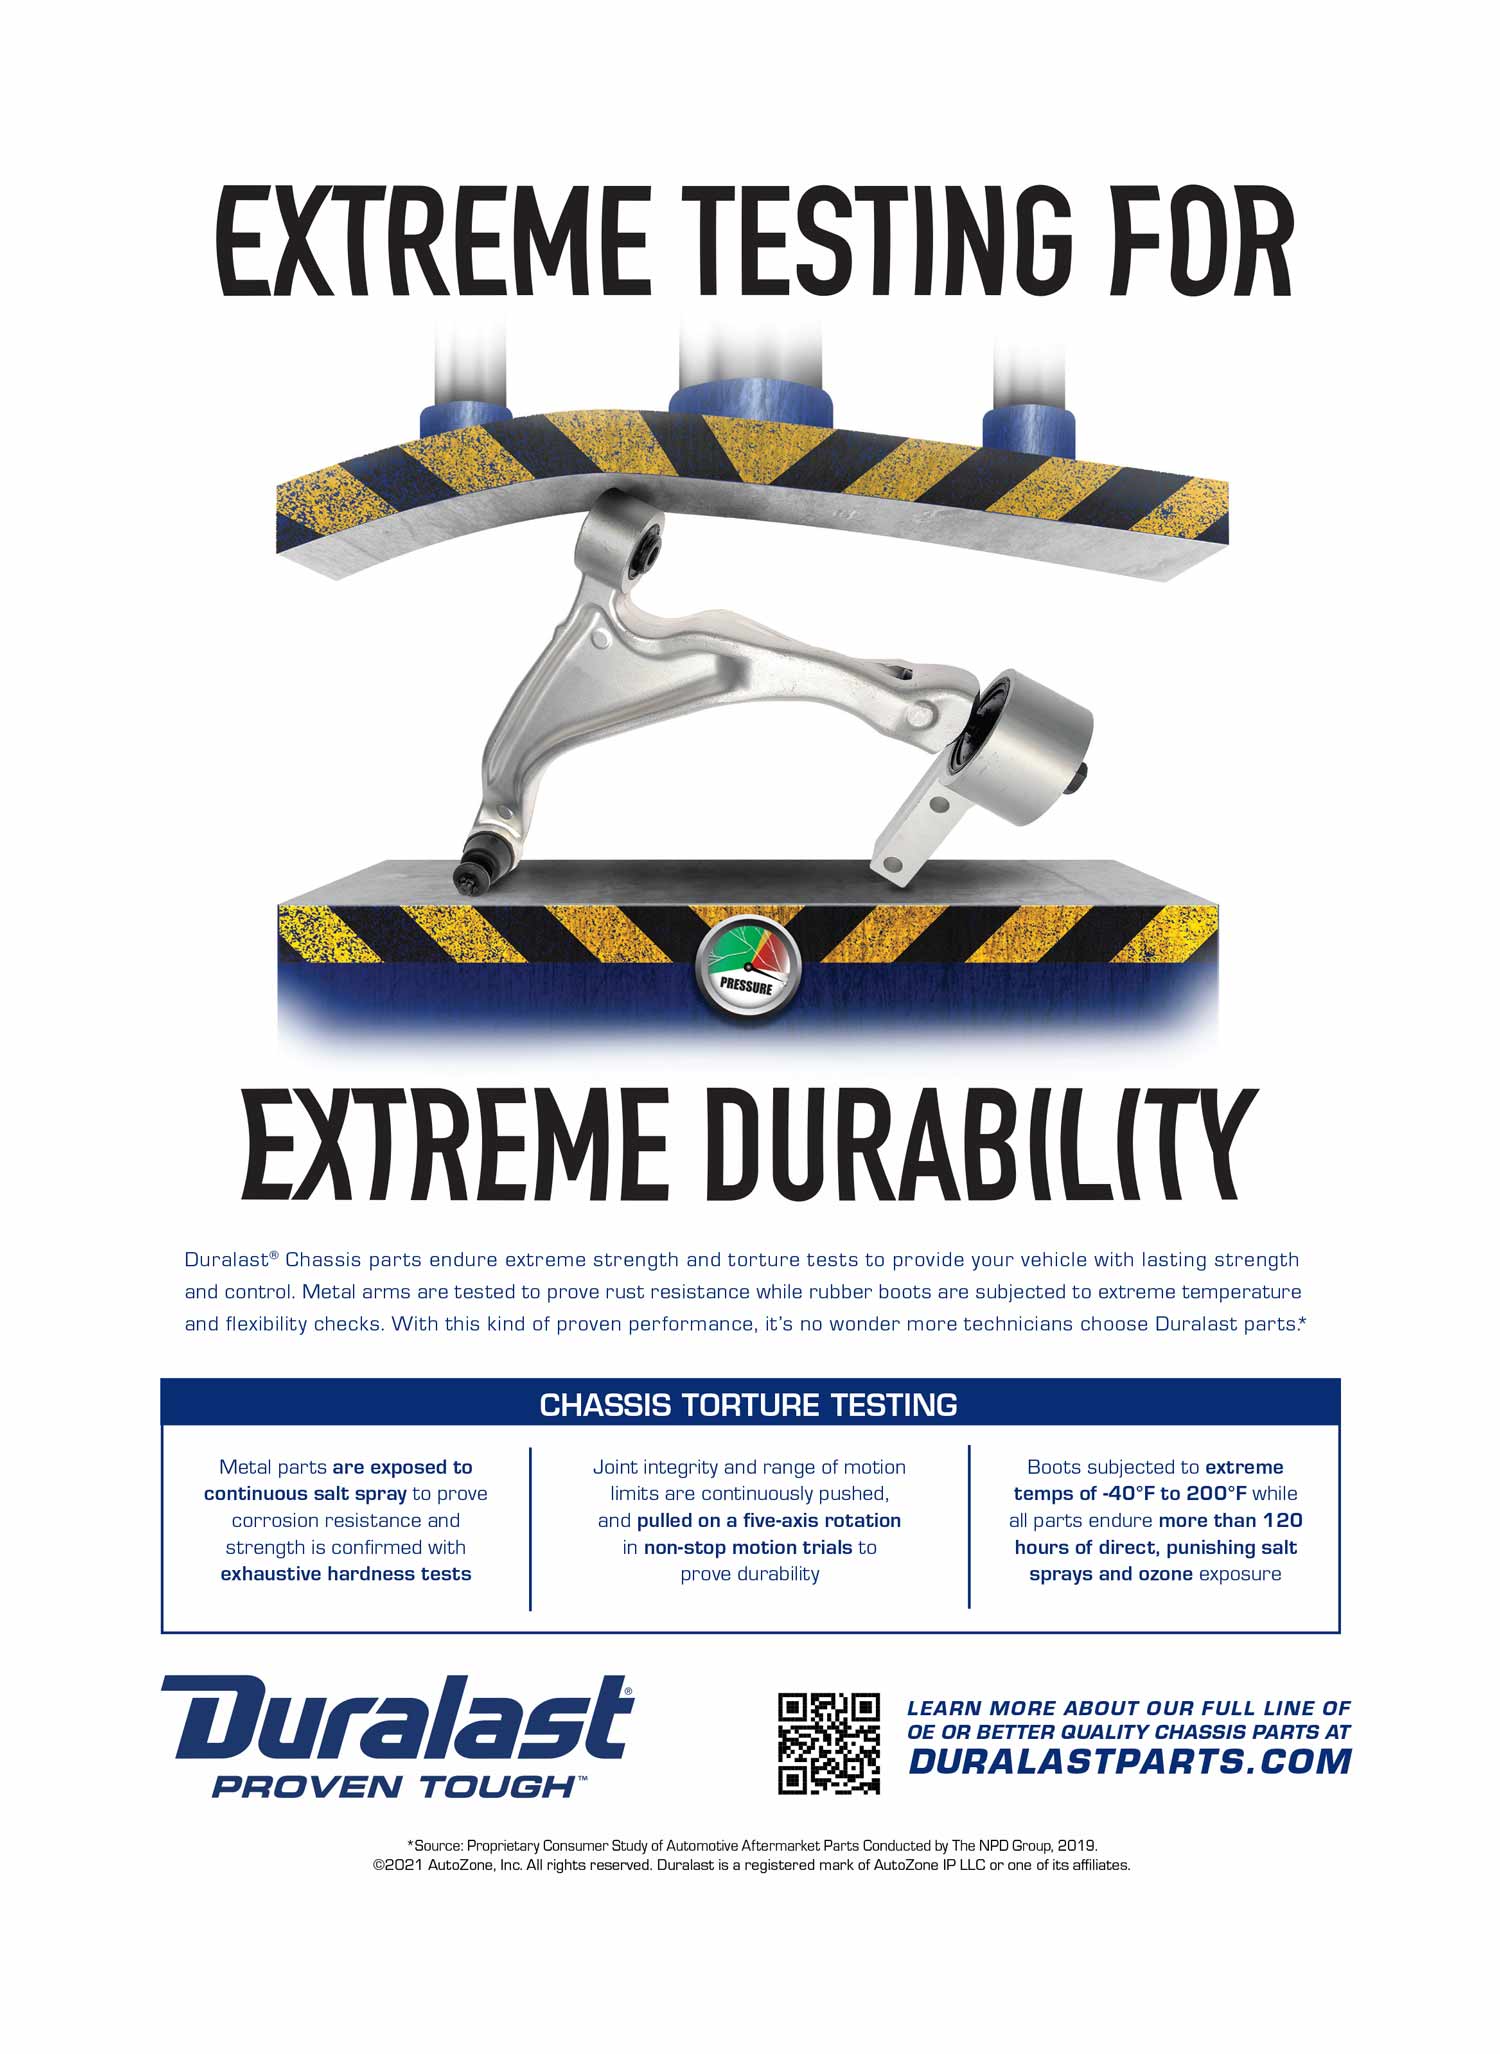 Duralast Chassis Advertisement